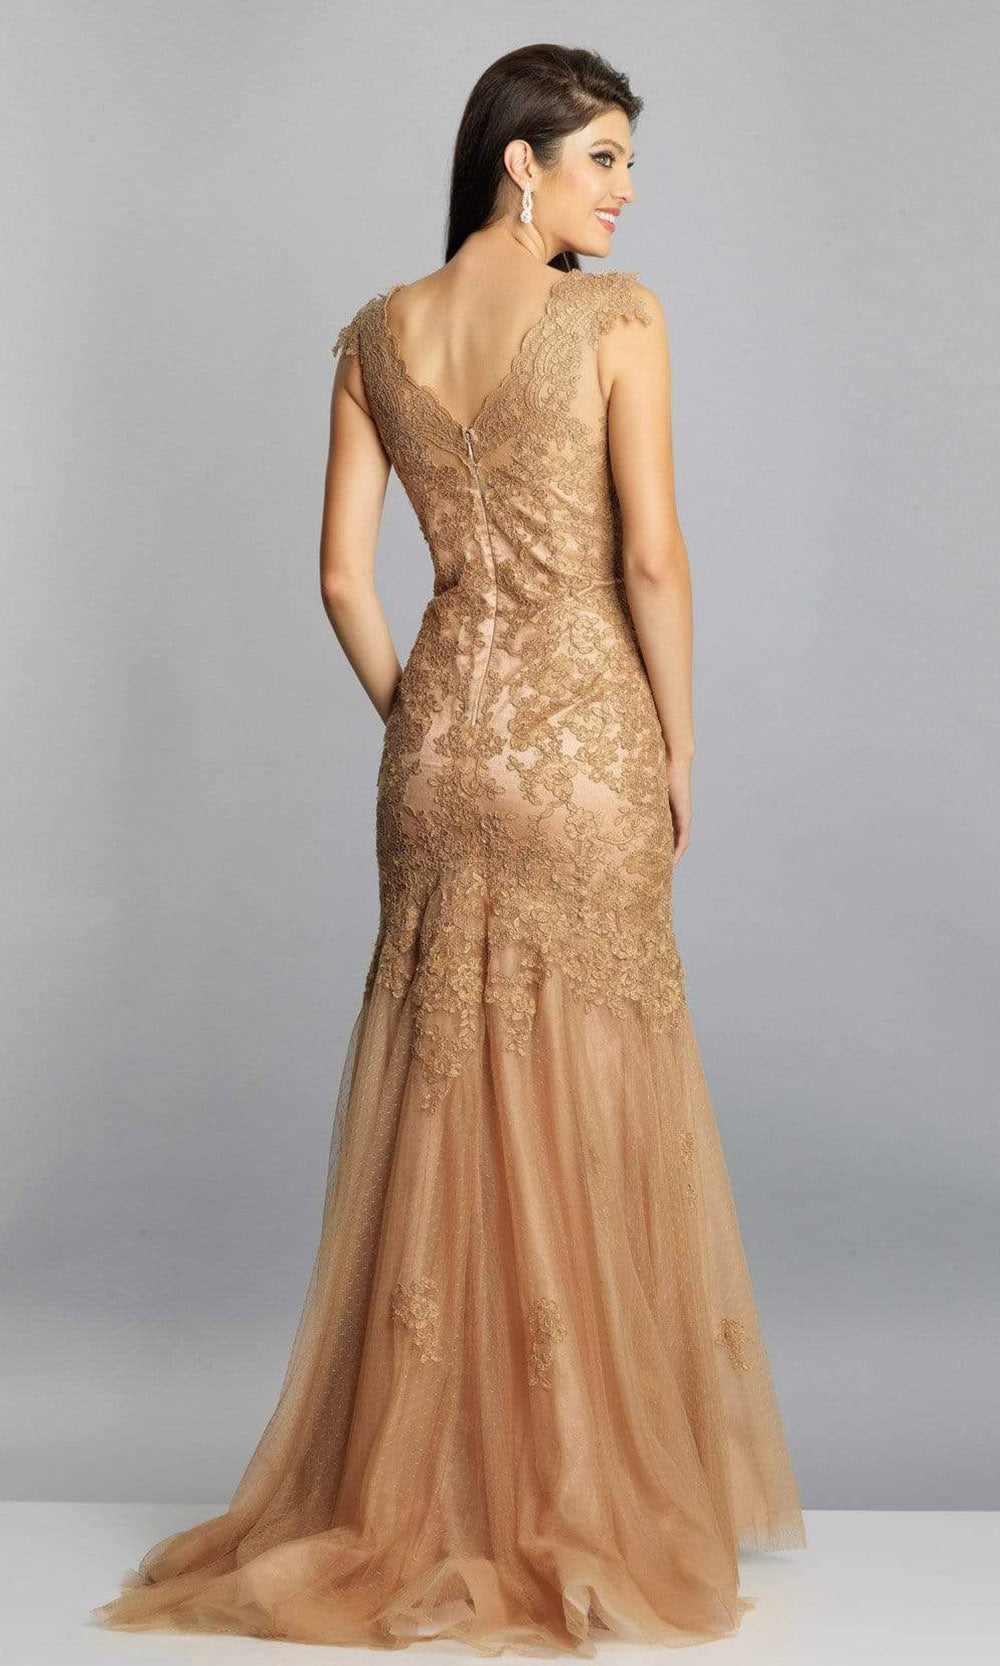 Dave & Johnny - Lace Ornate Tulle Trumpet Gown 1937SC